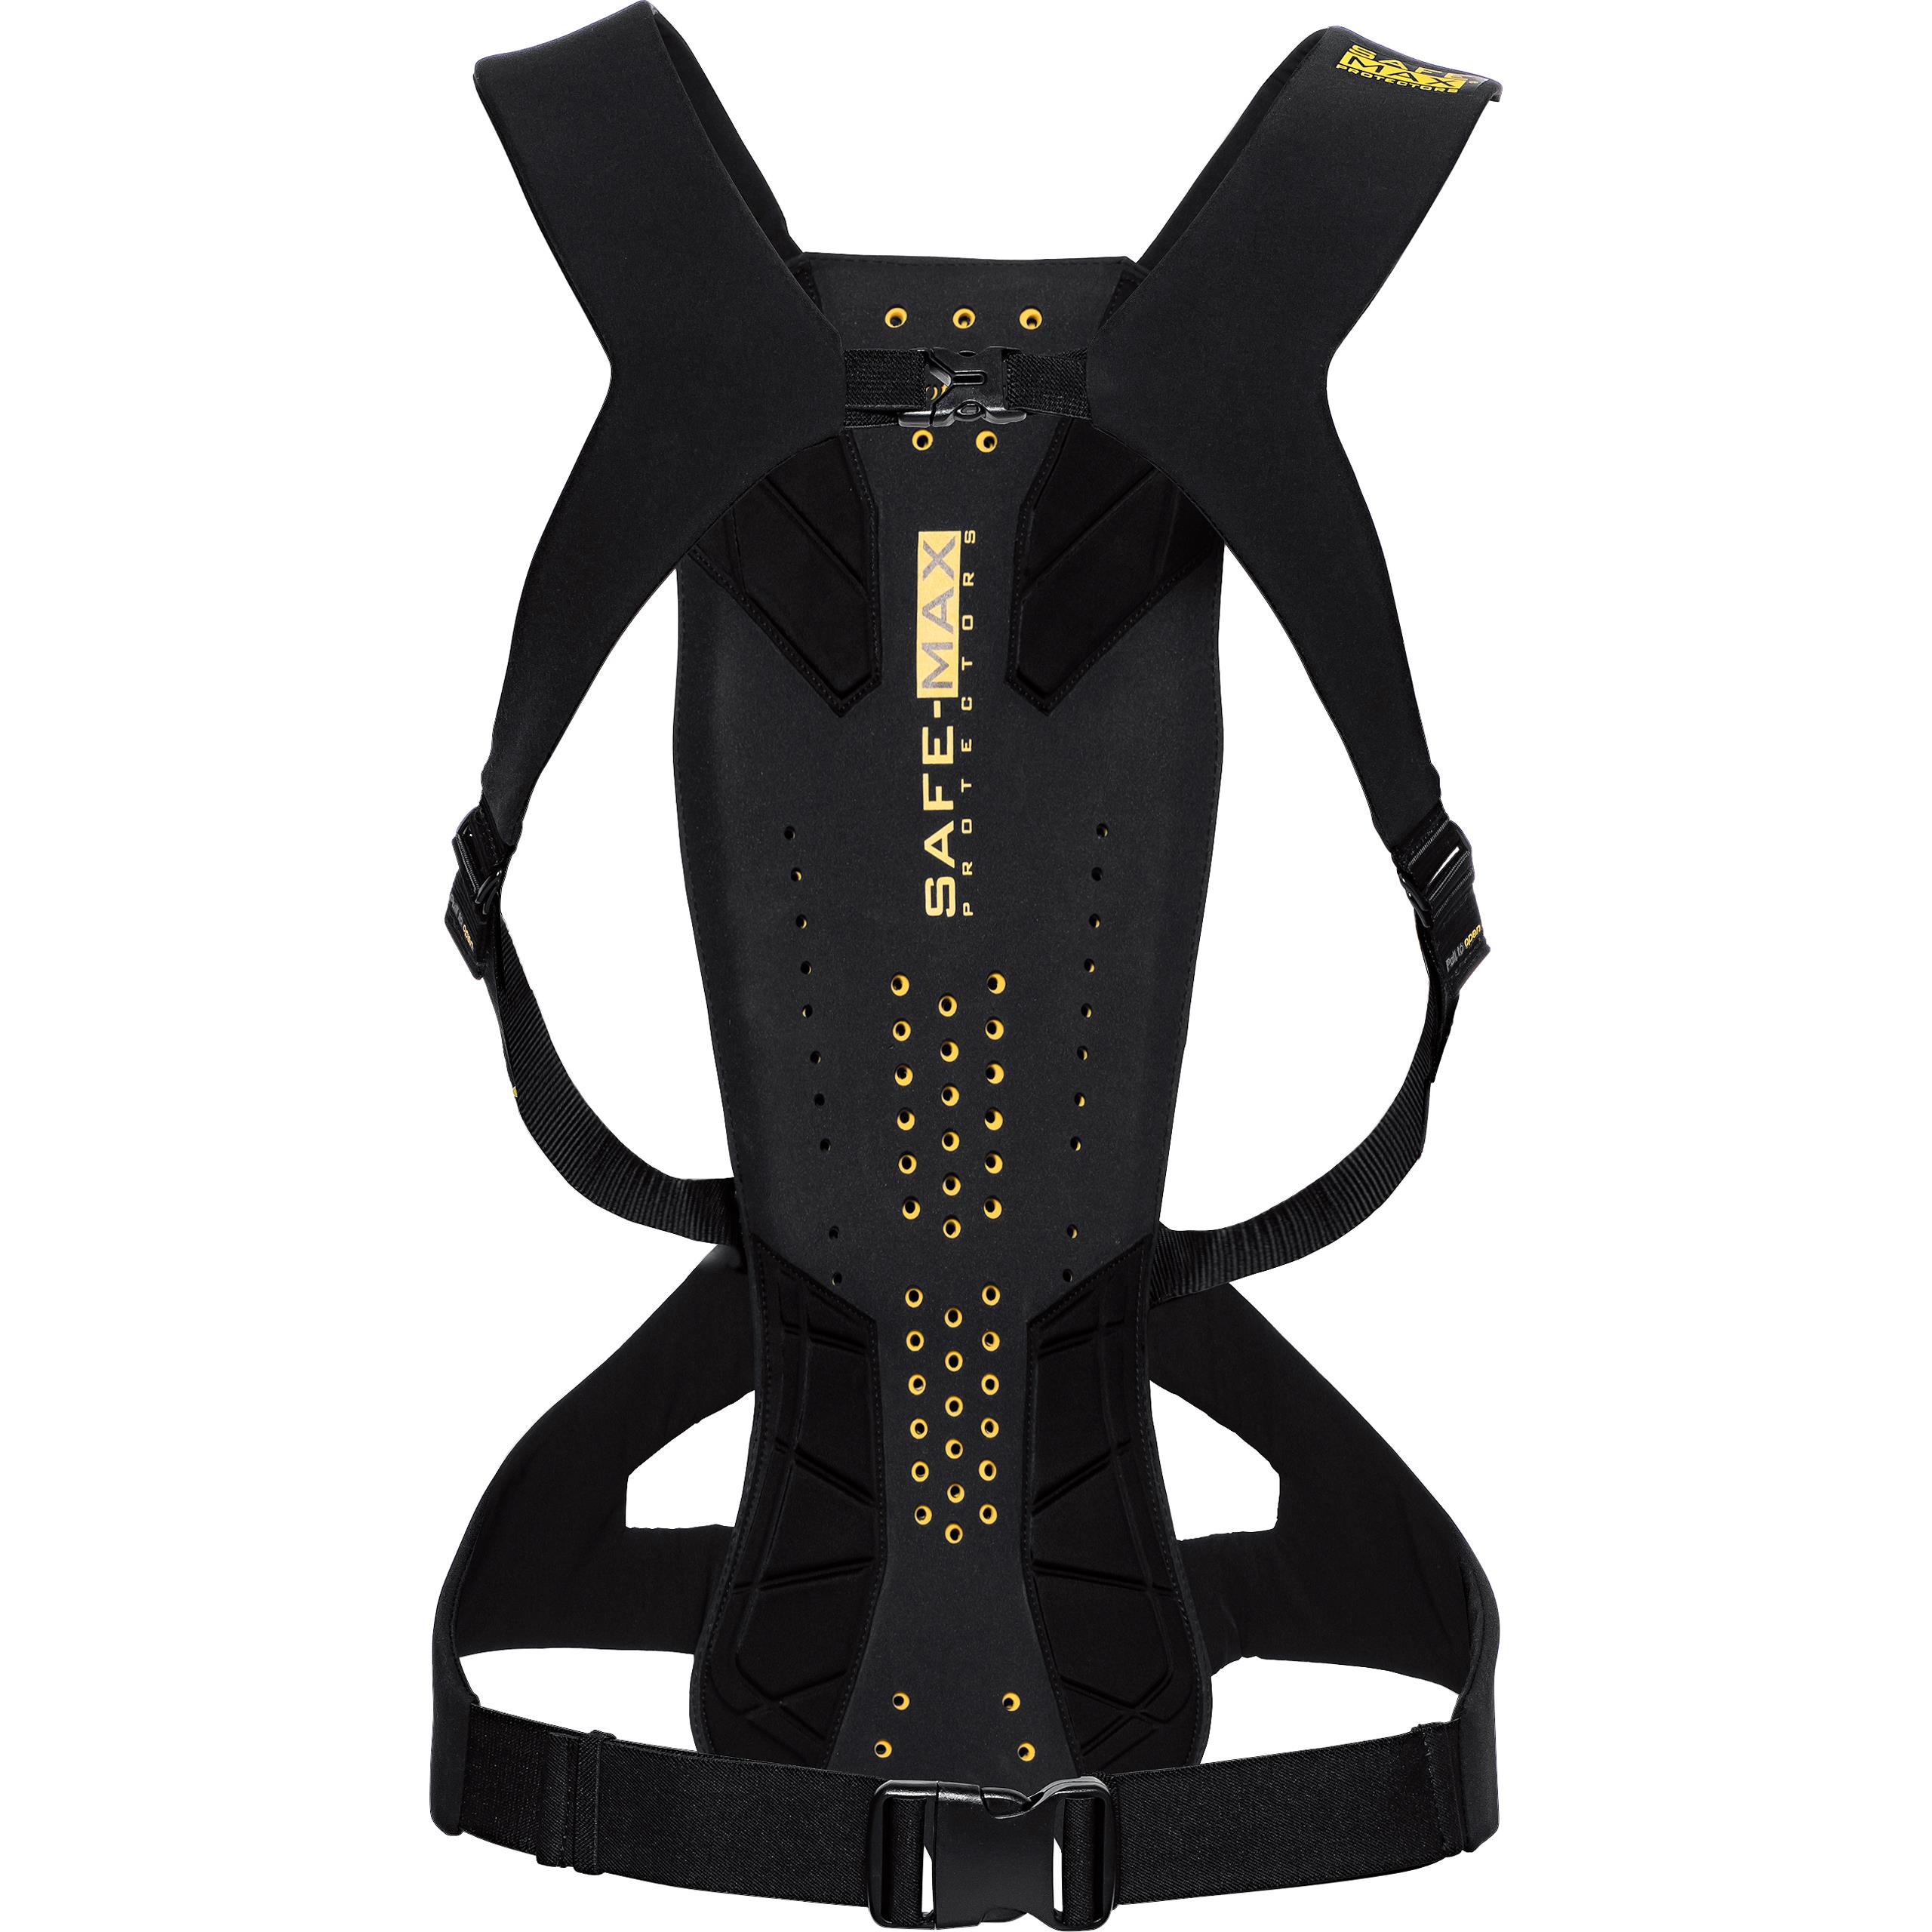 Buckle-up back protector 3.0